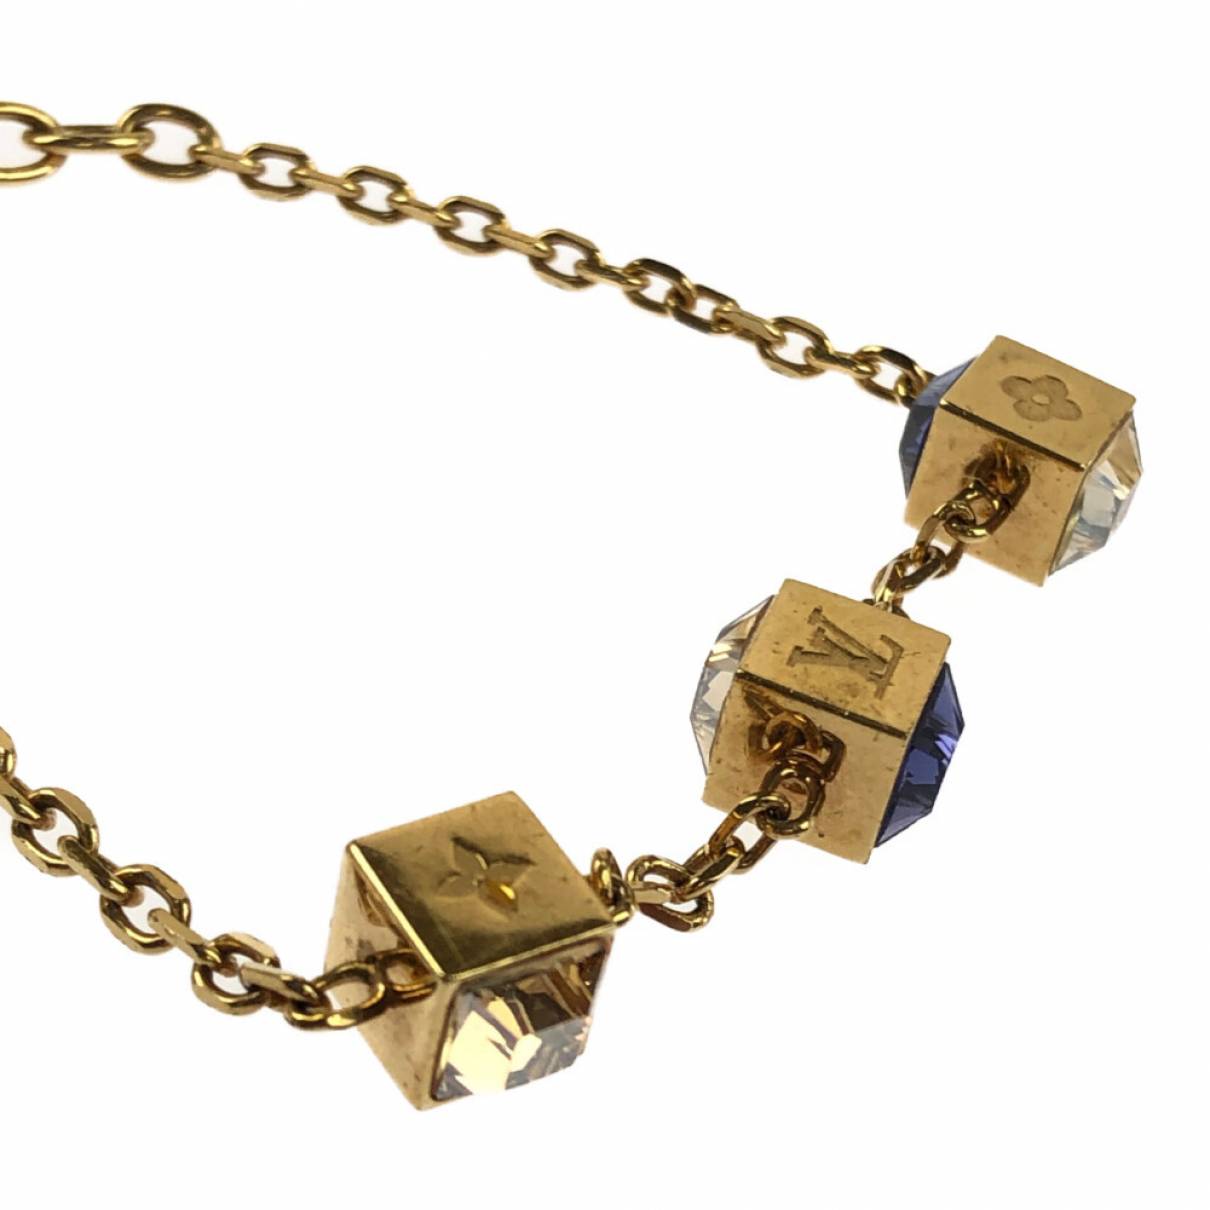 Louis Vuitton - Authenticated Blooming Bracelet - Gold Plated Gold for Women, Good Condition